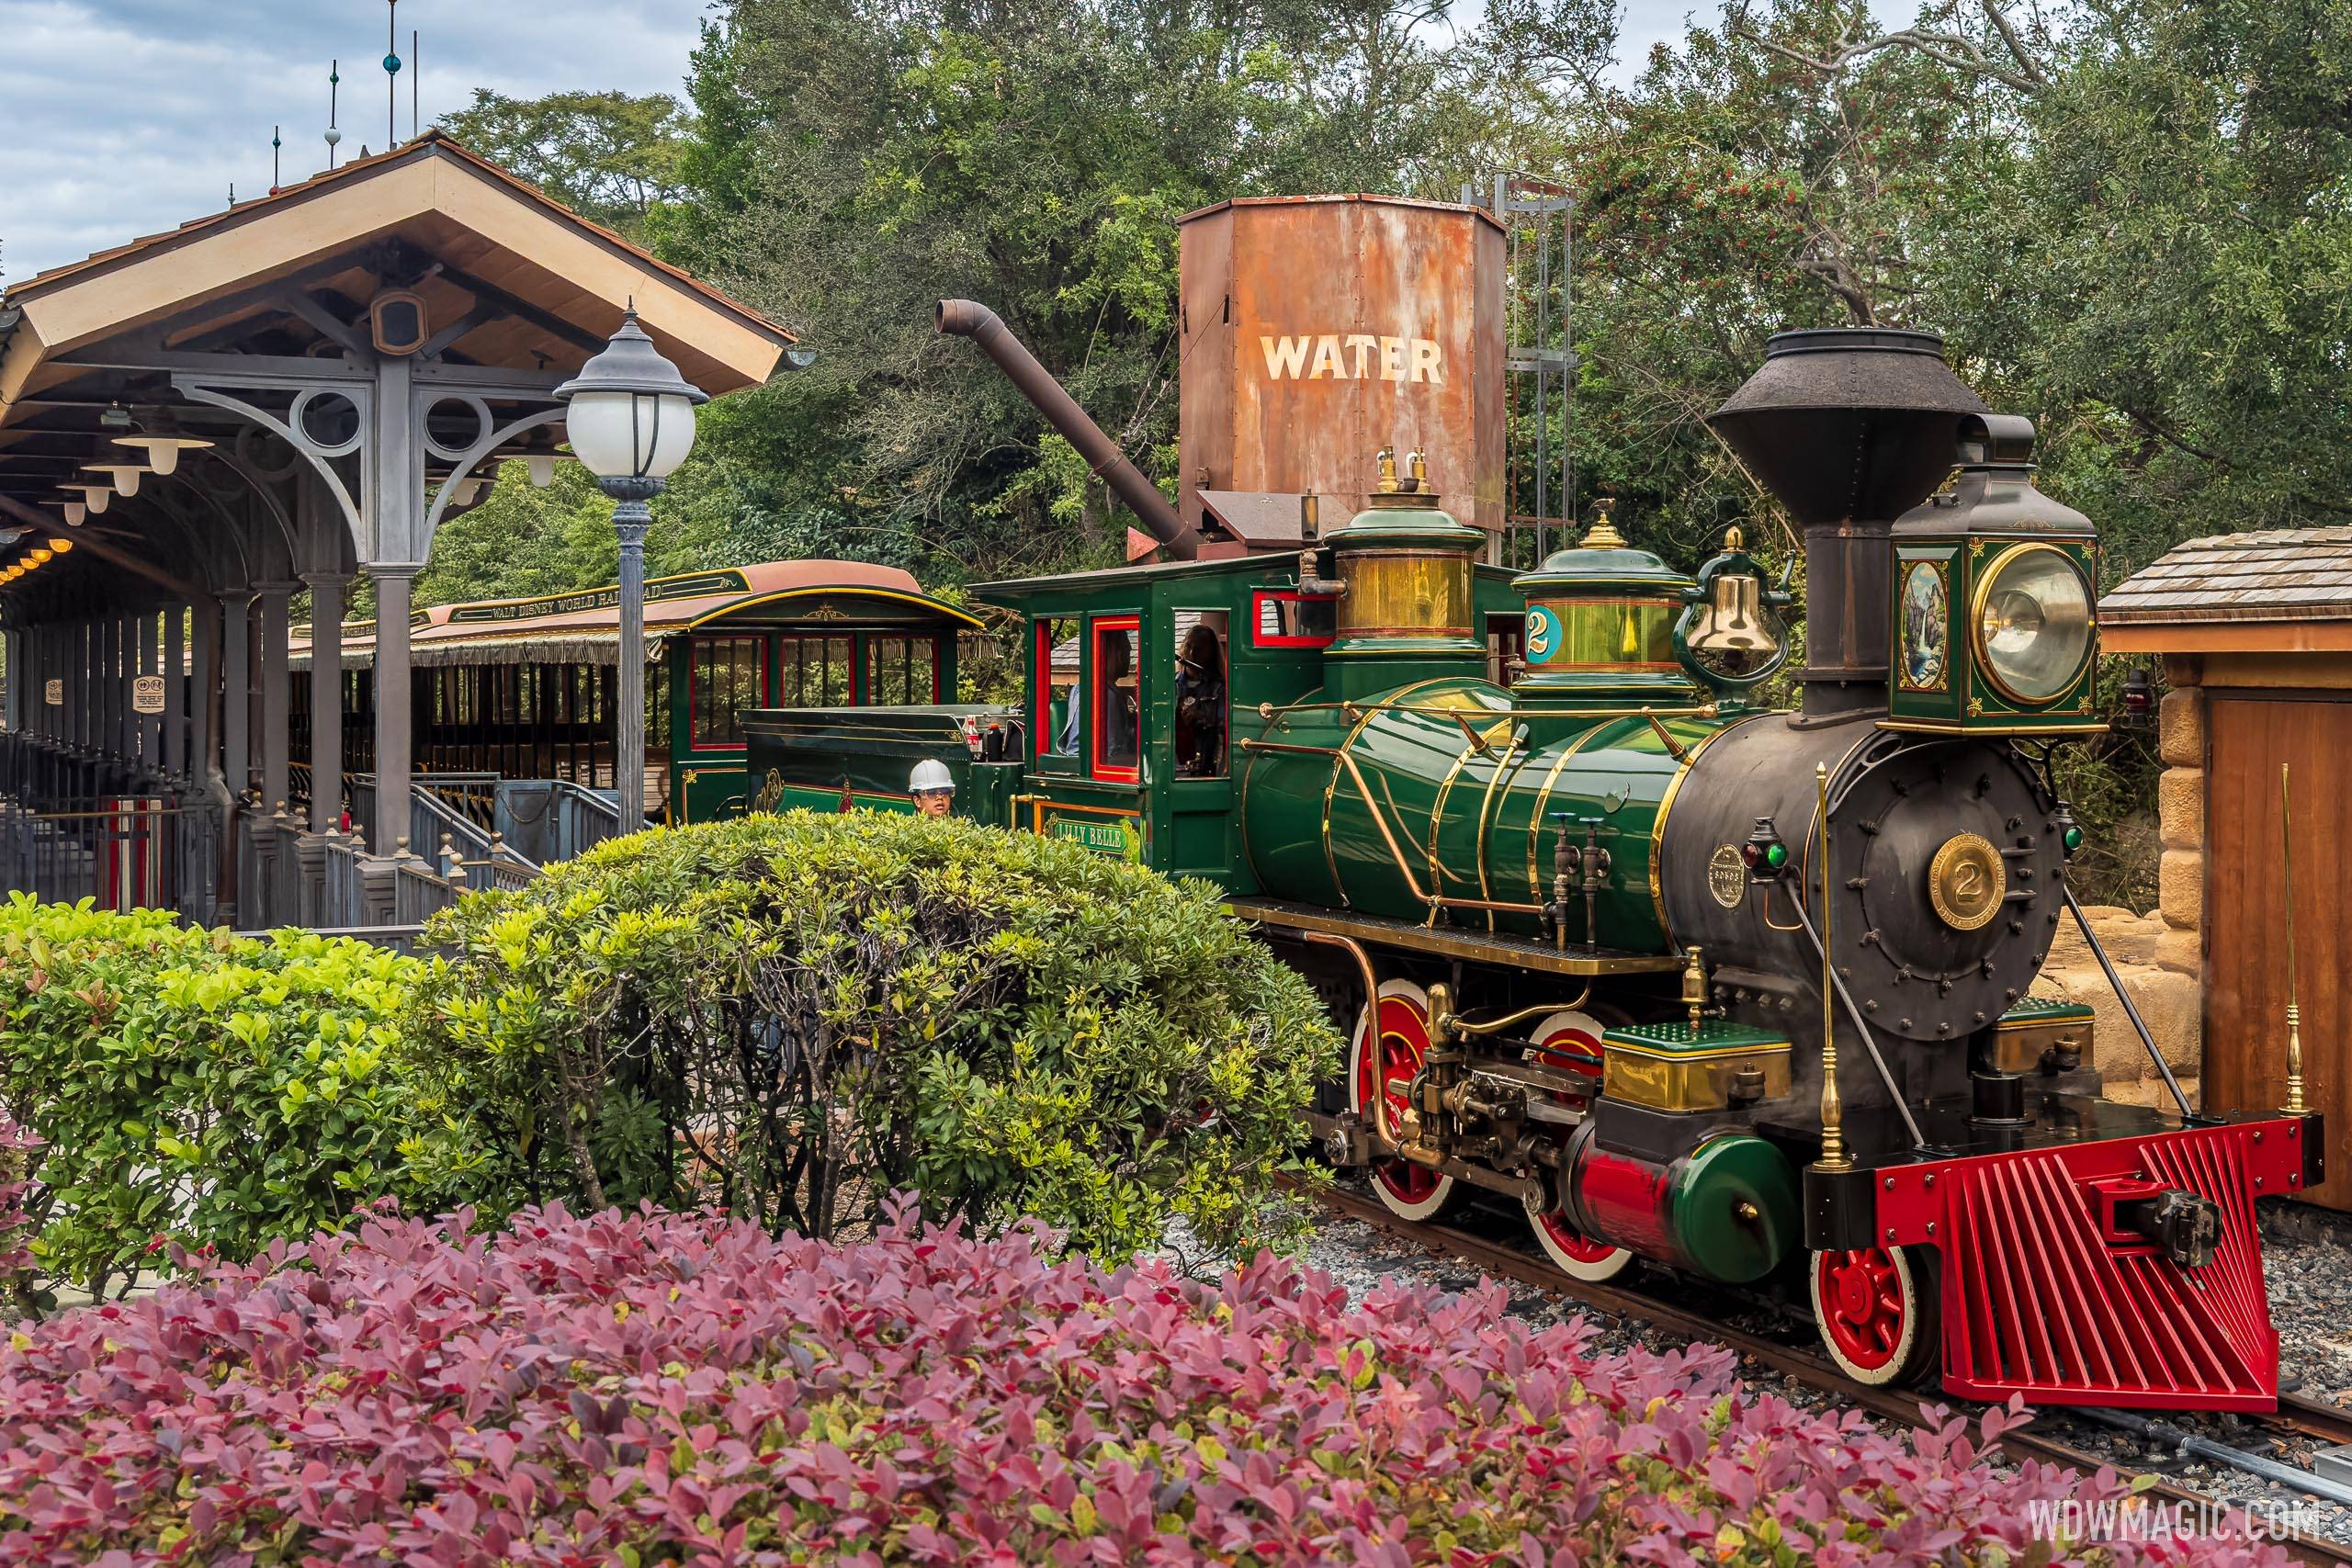 The Walt Disney World Railroad returning to service earlier today